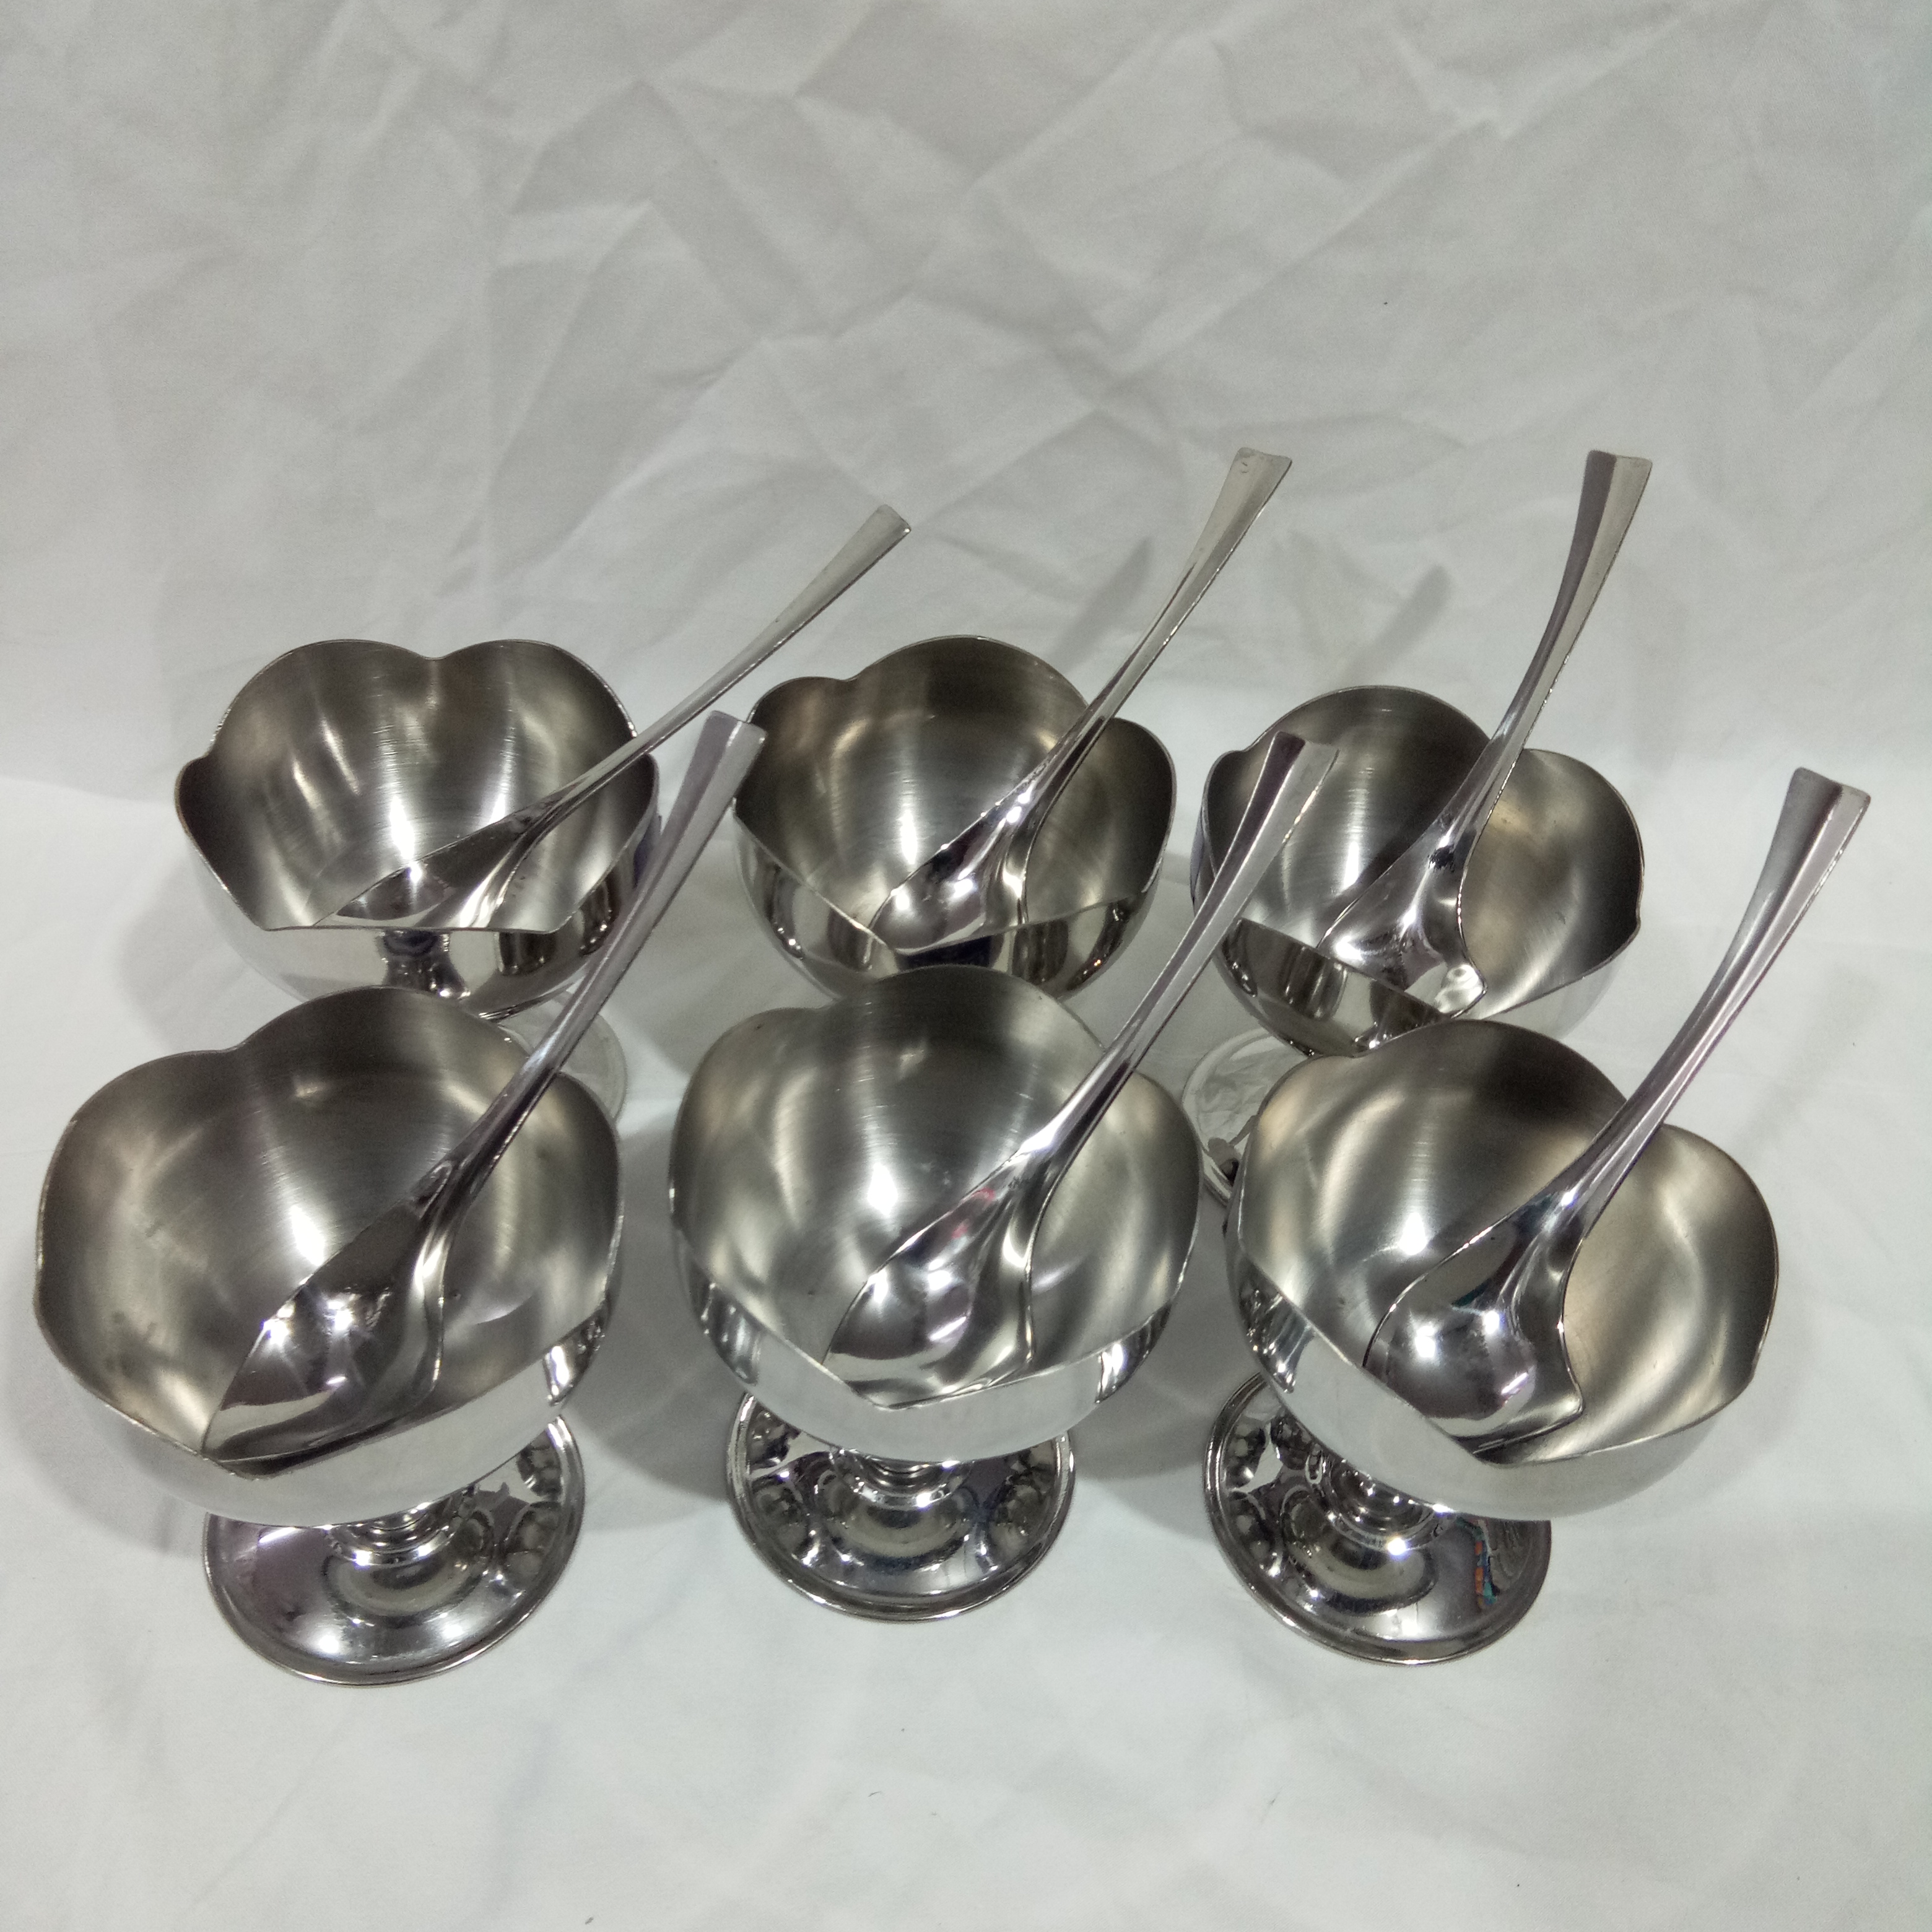 Ice Cream Bowl Set (6pcs. Stainless Steel with Spoons)